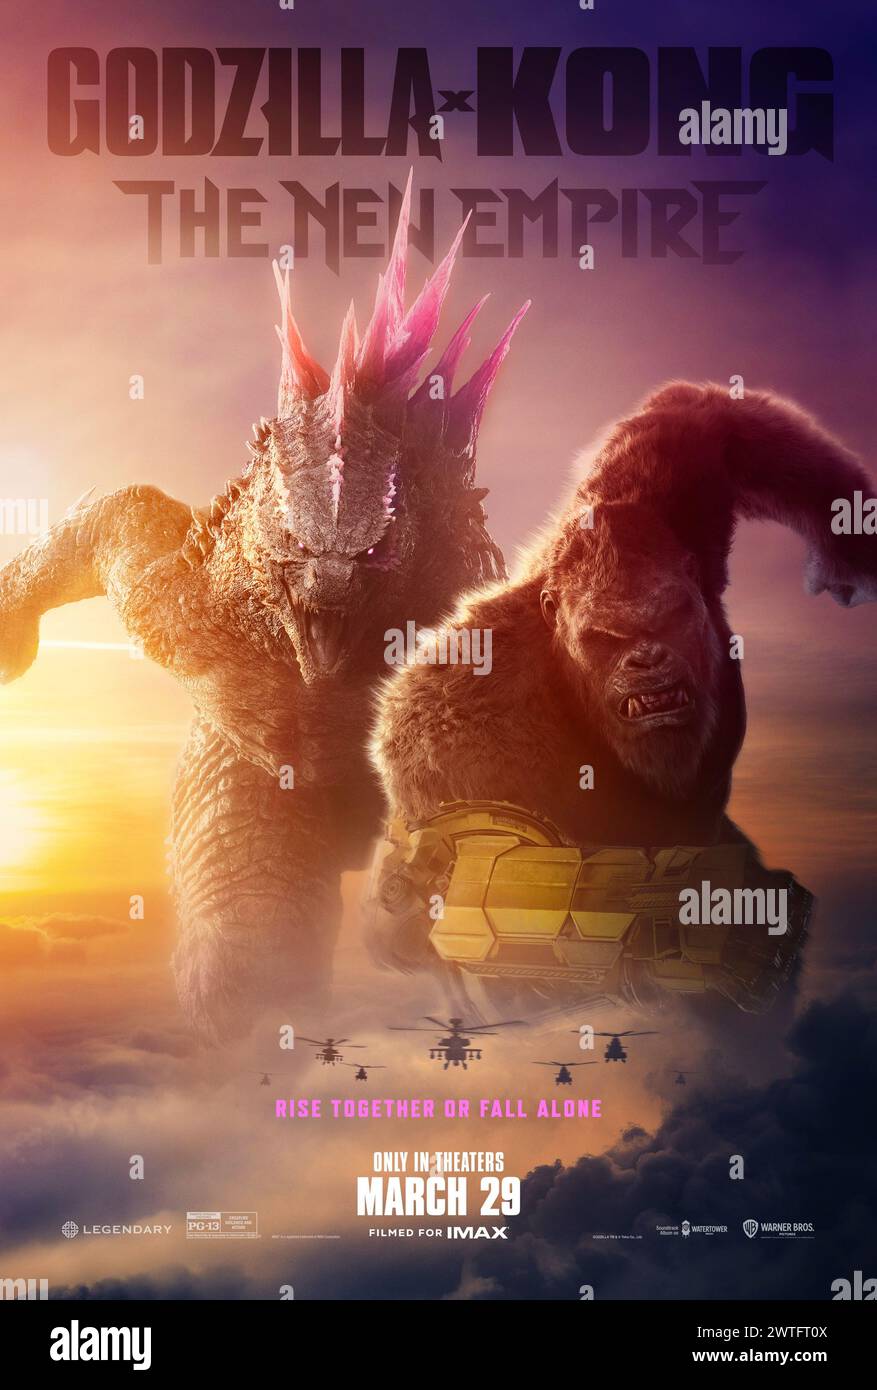 Godzilla x Kong: The New Empire (2024) directed by Adam Wingard and starring Rebecca Hall, Brian Tyree Henry and Dan Stevens. Two ancient titans, Godzilla and Kong, clash in an epic battle as humans unravel their intertwined origins and connection to Skull Island's mysteries. US advance poster.***EDITORIAL USE ONLY*** Credit: BFA / Warner Bros Stock Photo